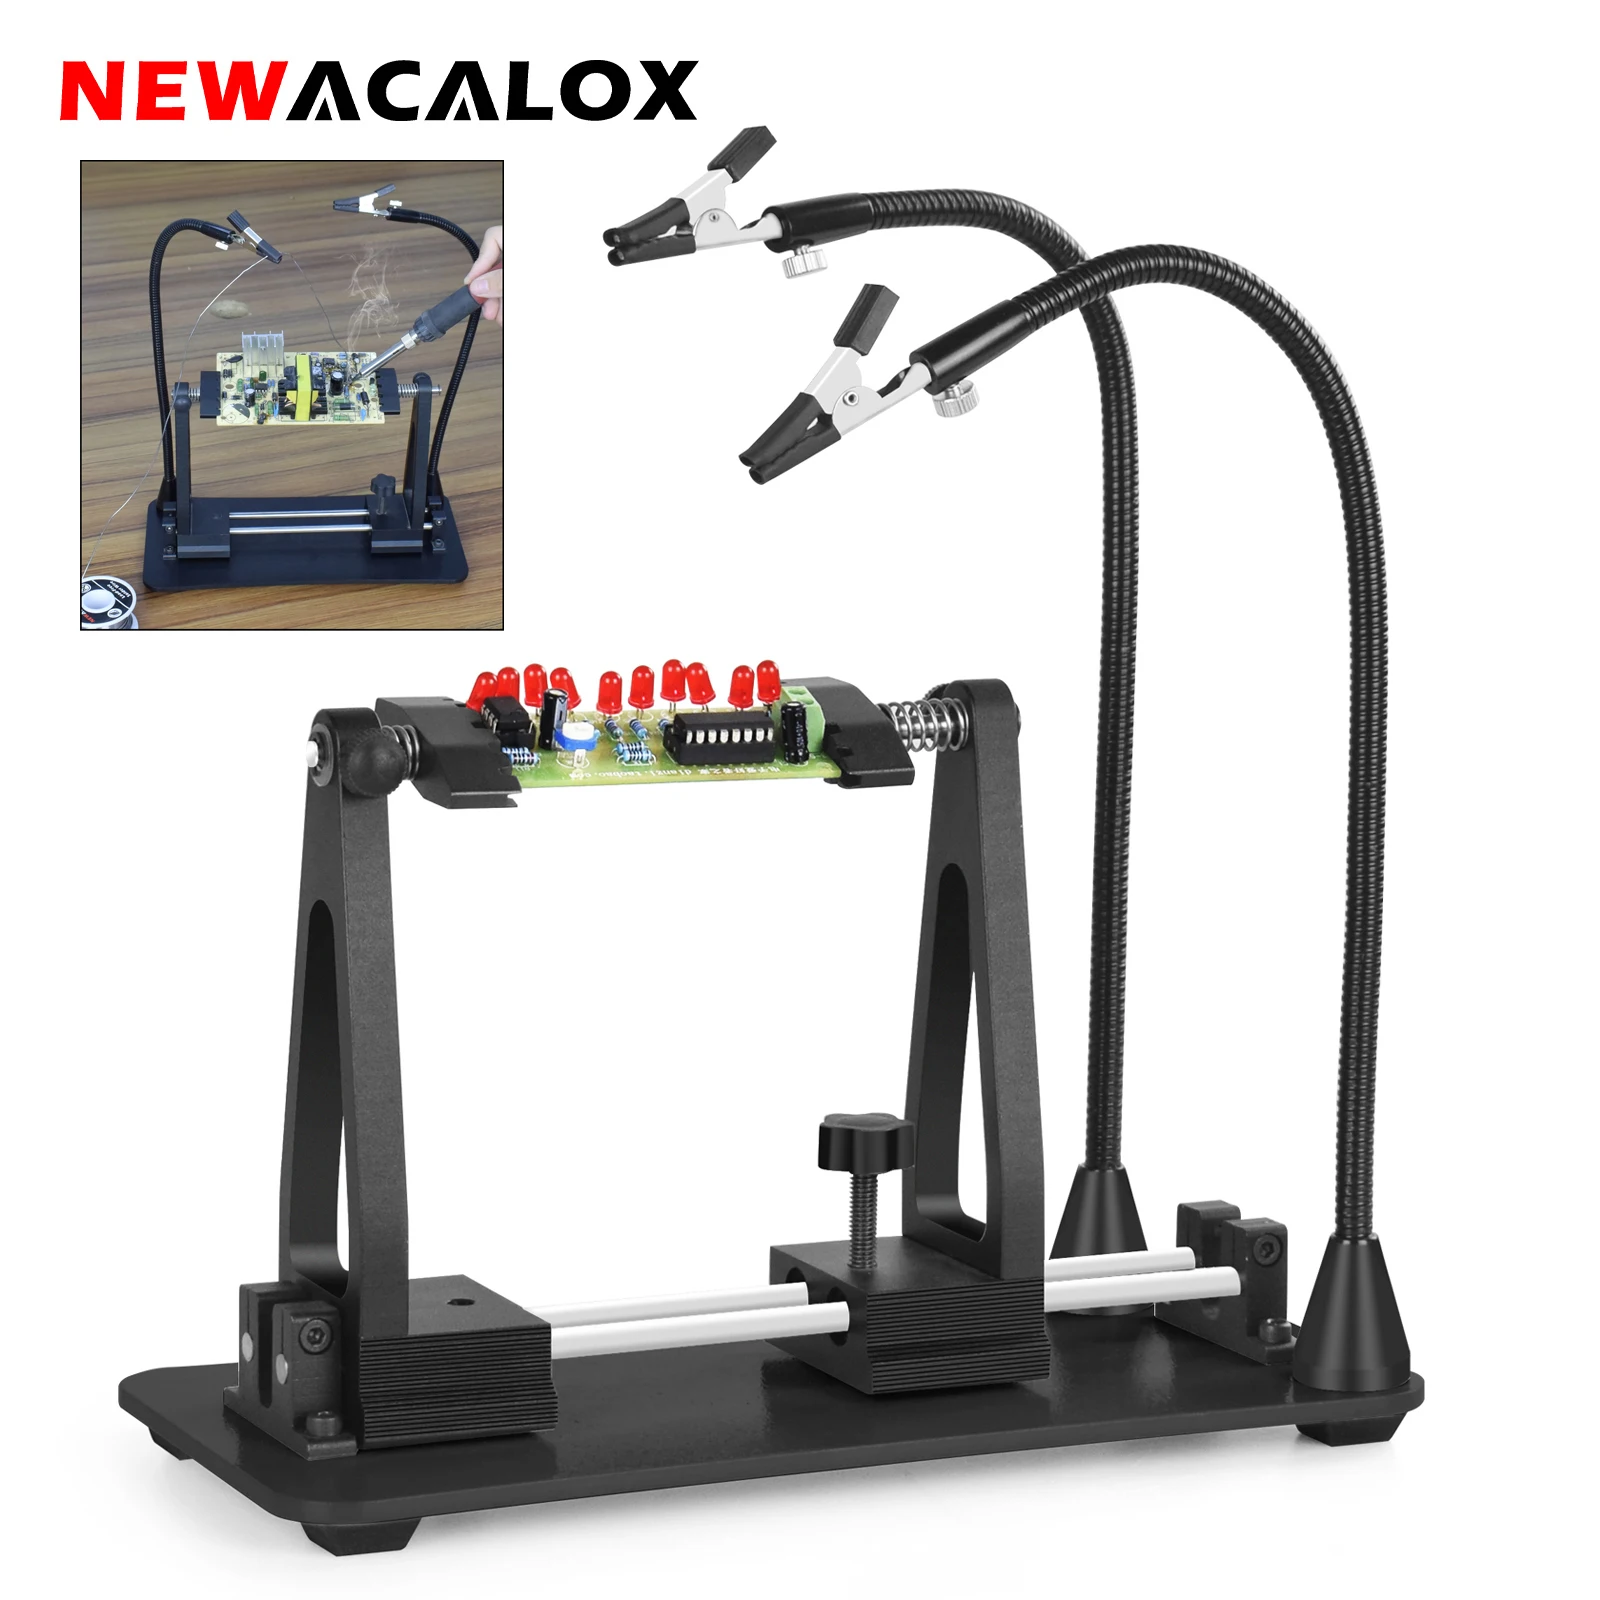 NEWACALOX 360° Adjustable PCB Holder with 2Pcs Magnetic Flexible Soldering Third Hand Welding Repair Helping Hands Station newacalox multifunctional hot air gun frame with third helping hand for 878d 858 soldering station repair welding bga pcb chips